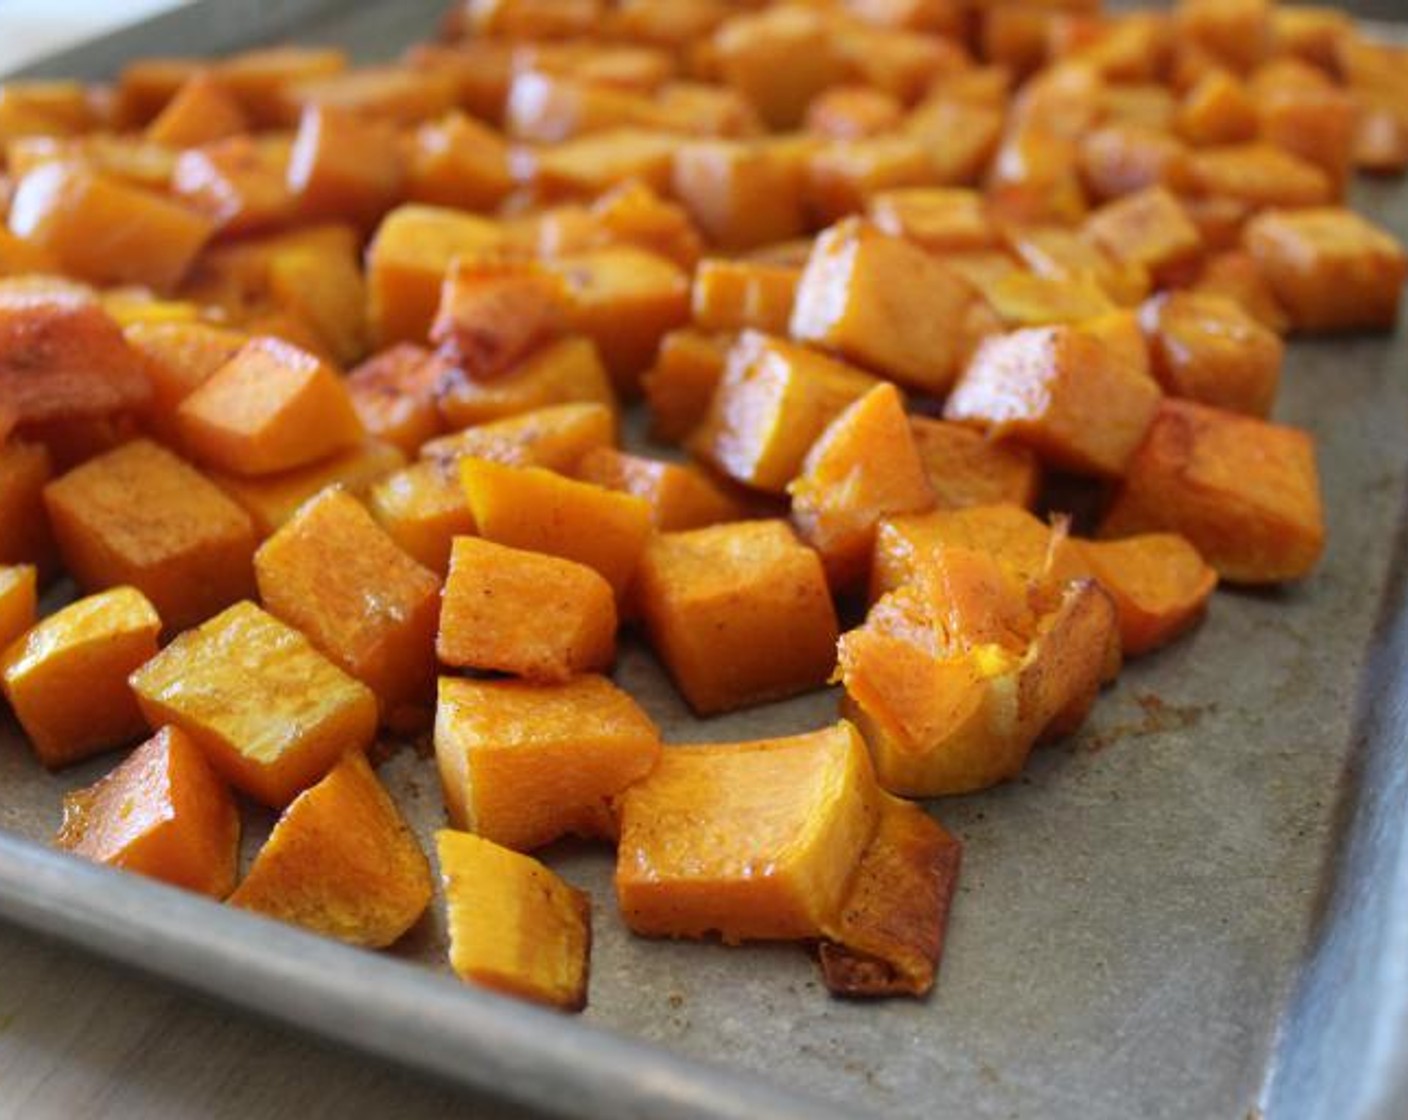 step 2 Place the Butternut Squash (1) on a sheet pan, add Extra-Virgin Olive Oil (2 Tbsp), Ground Cinnamon (1/2 Tbsp), and Kosher Salt (to taste) and toss lightly with your hands.